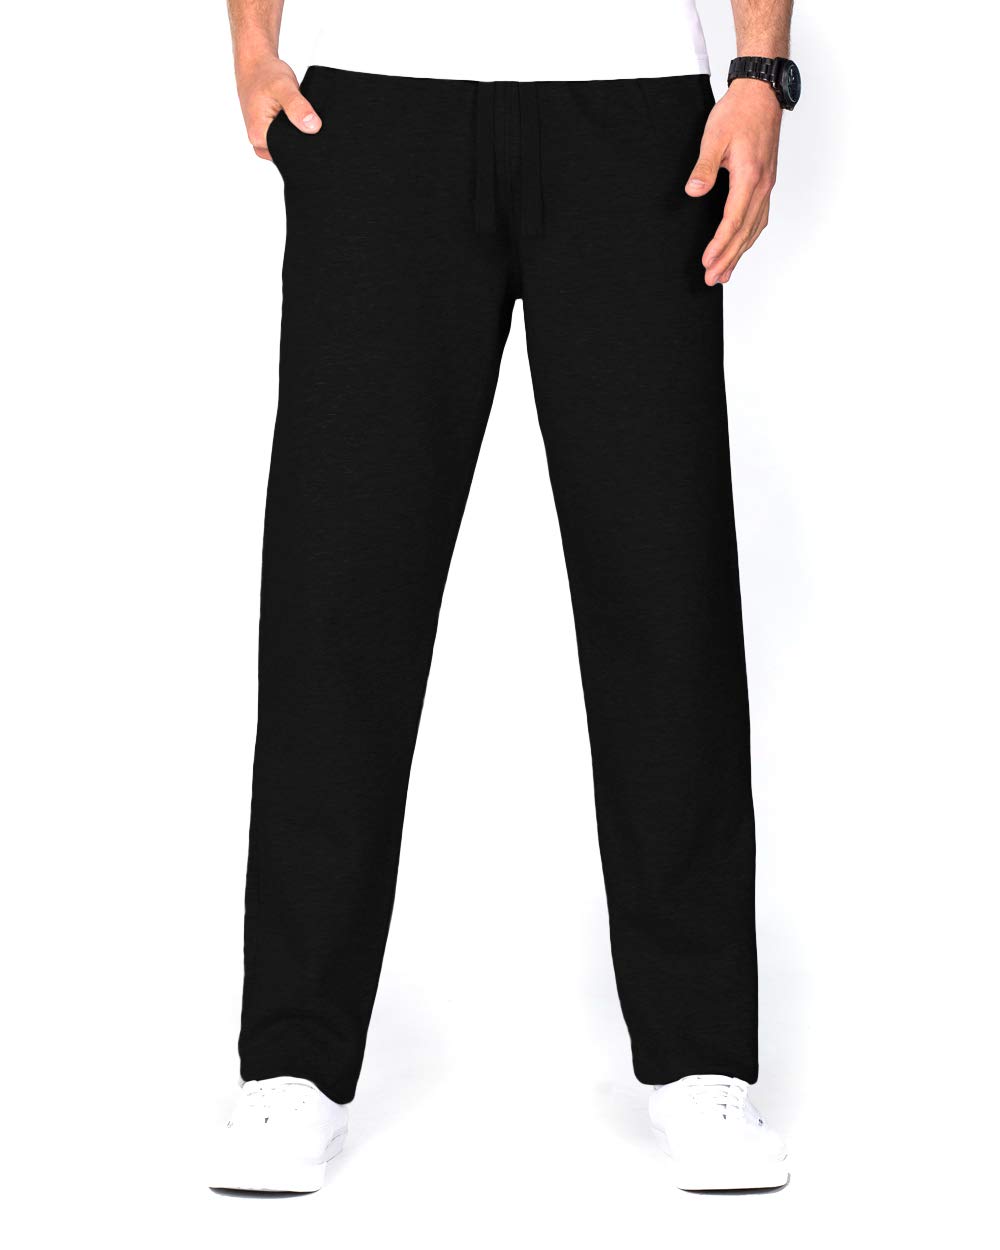 Idtswch 32/34/36/38 Long Inseam Mens Tall Sweatpants Extra Long